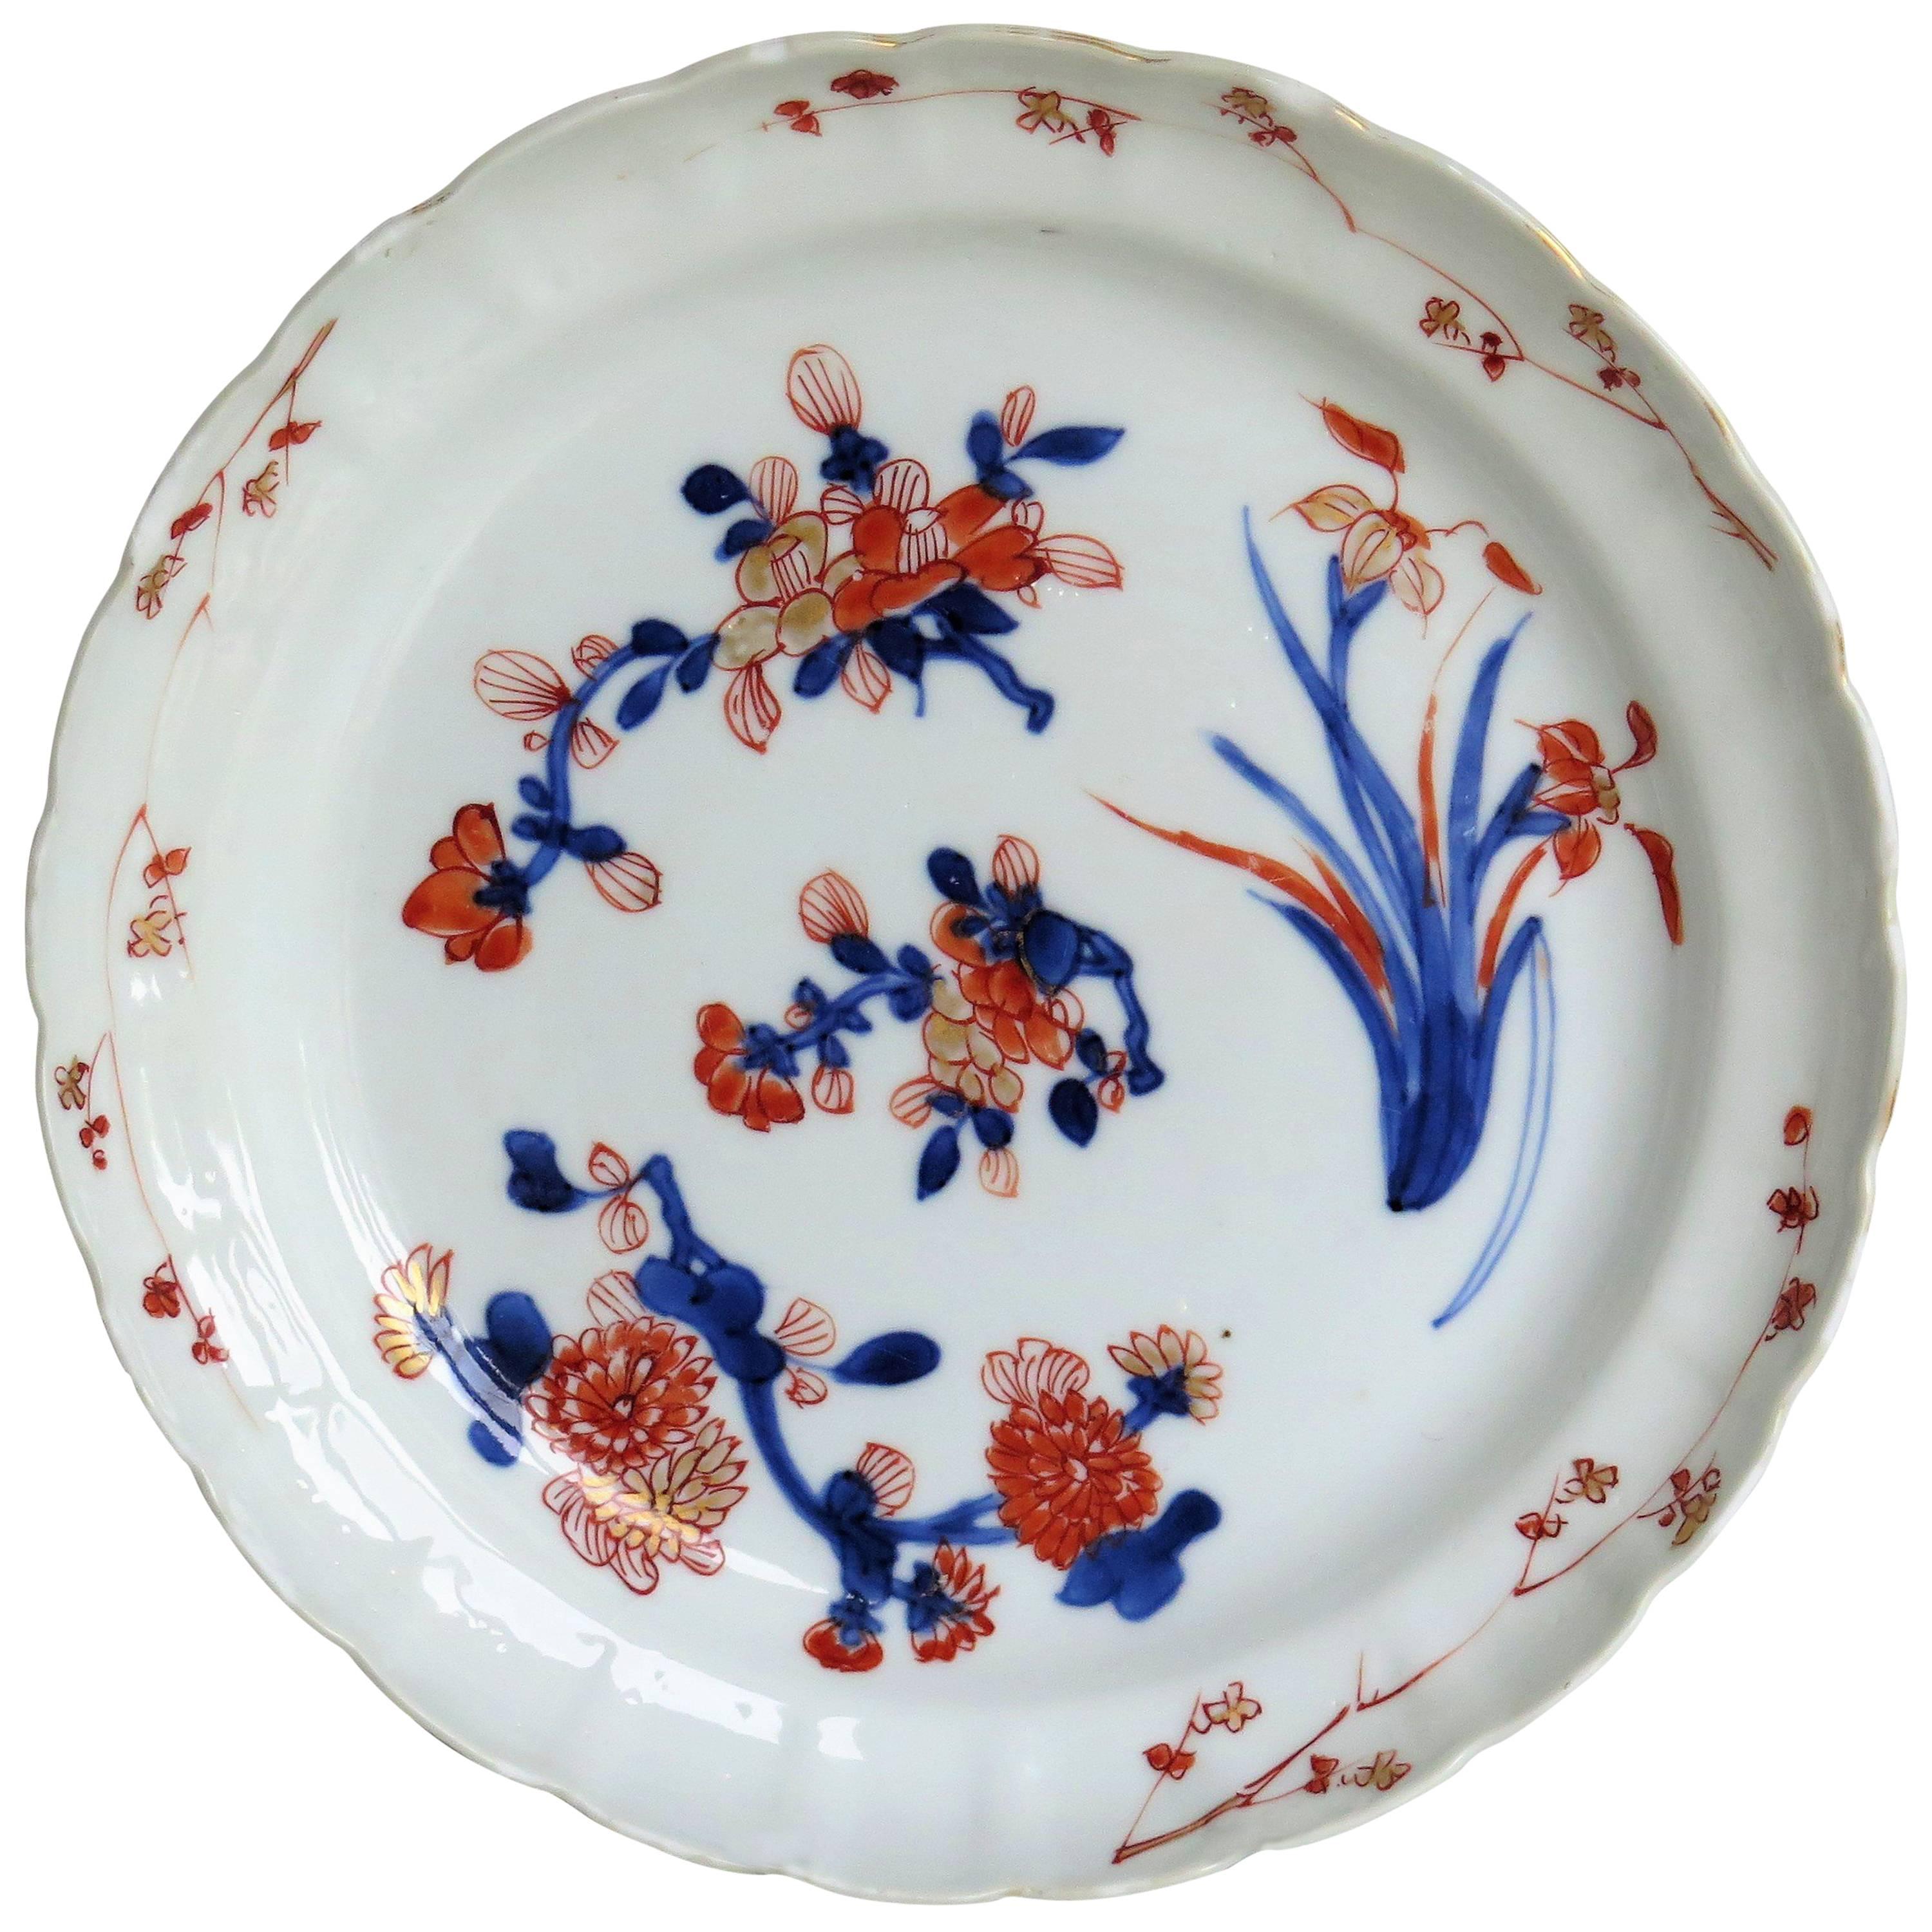 Early 18th Century Chinese Porcelain Plate or Dish, Circa 1735